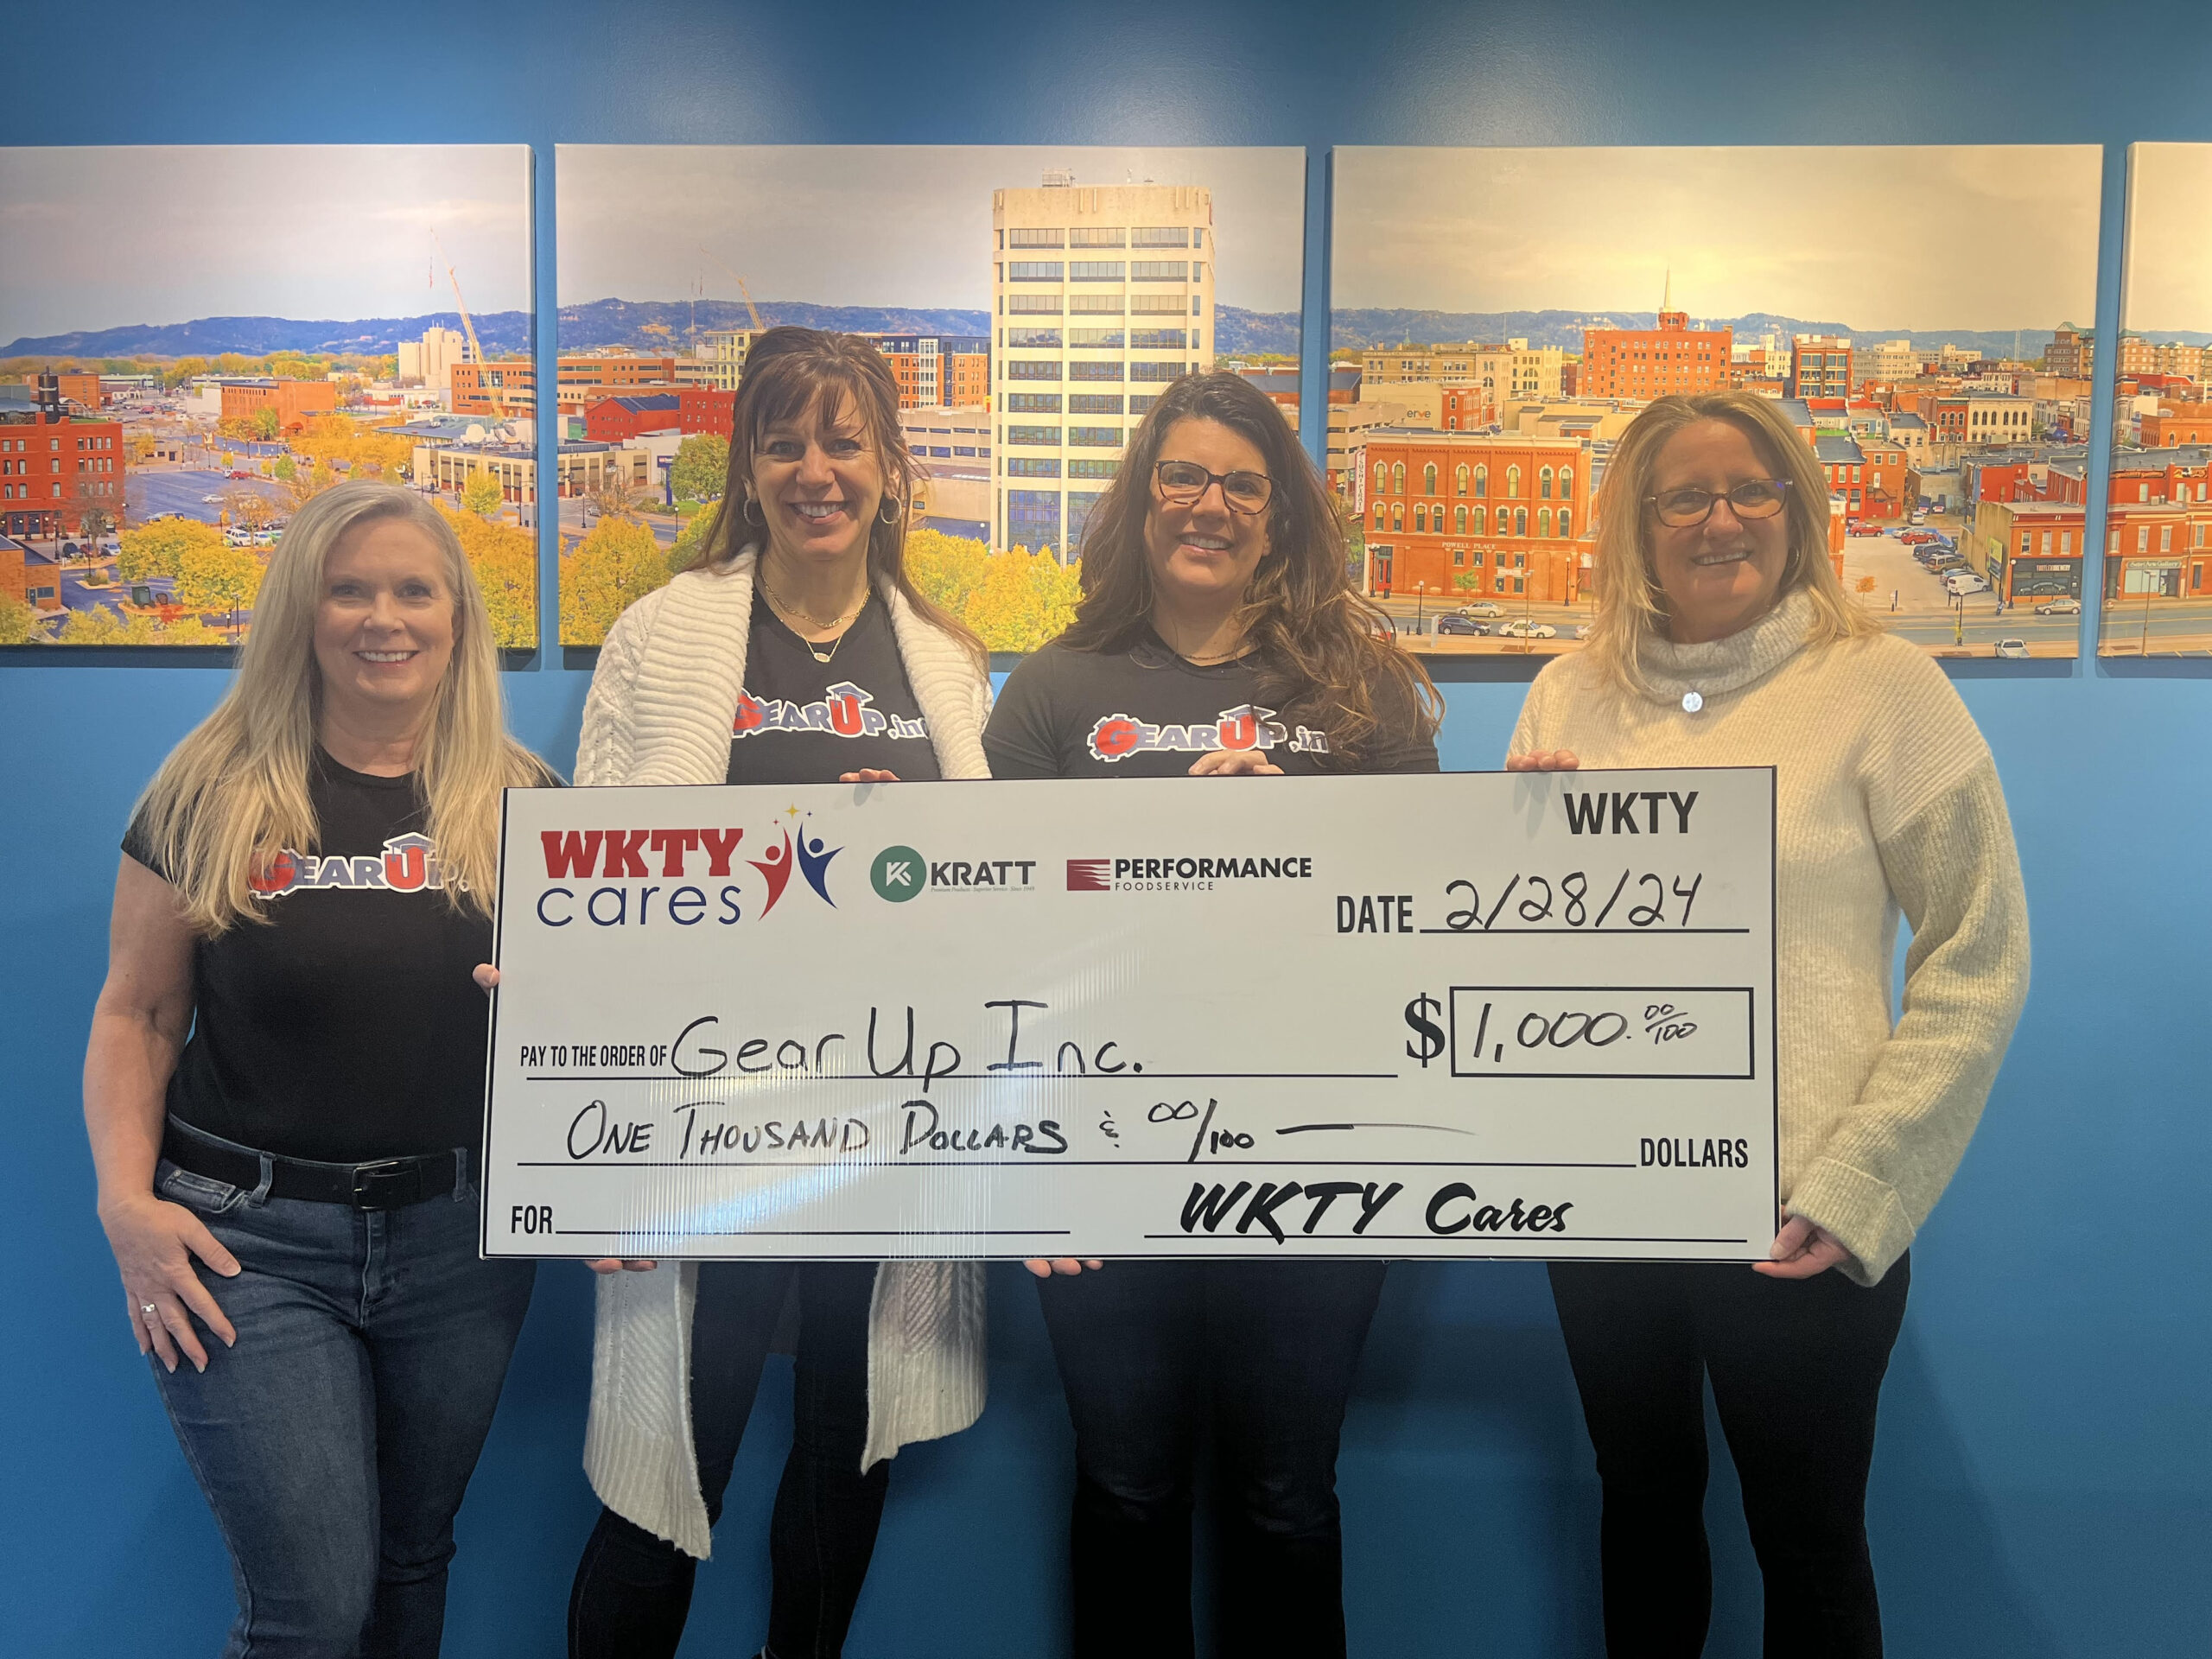 WKTY Cares Supports Gear Up Inc.